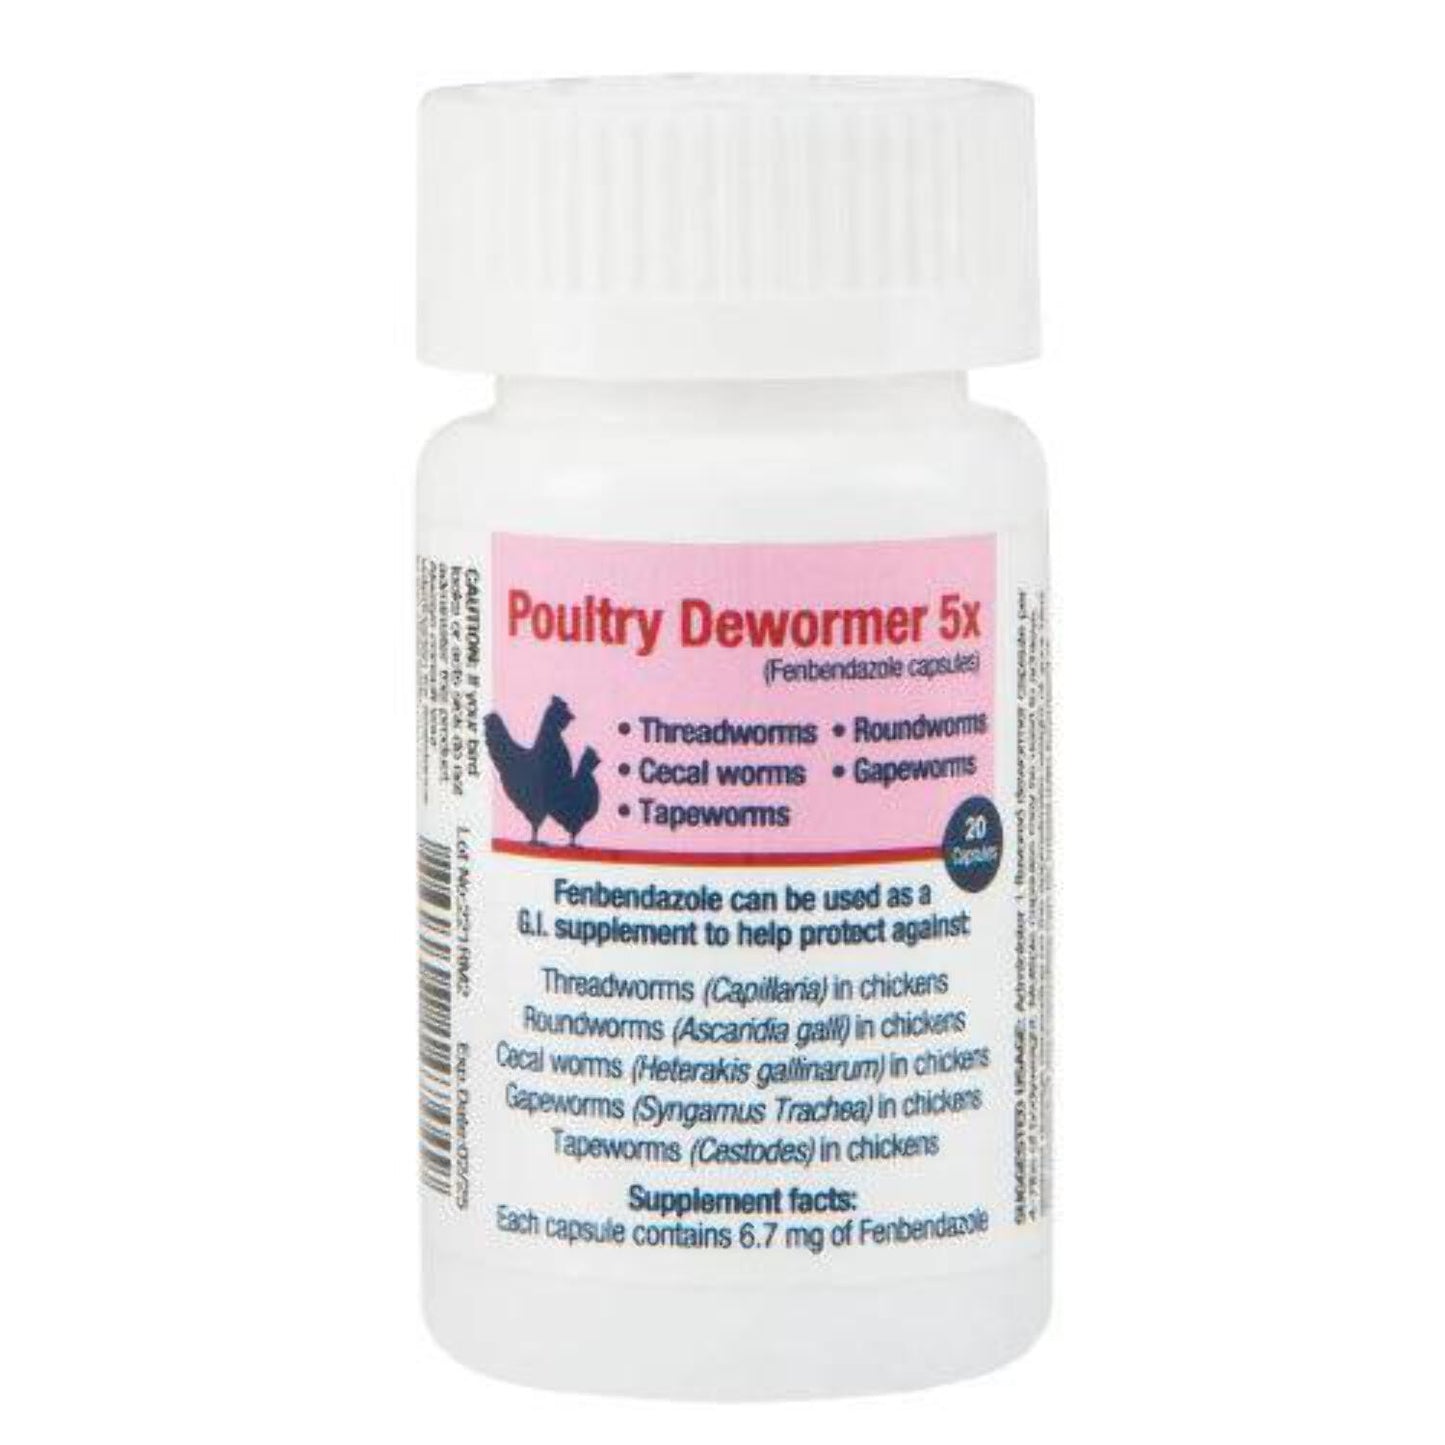 20ct Poultry Dewormer 5x